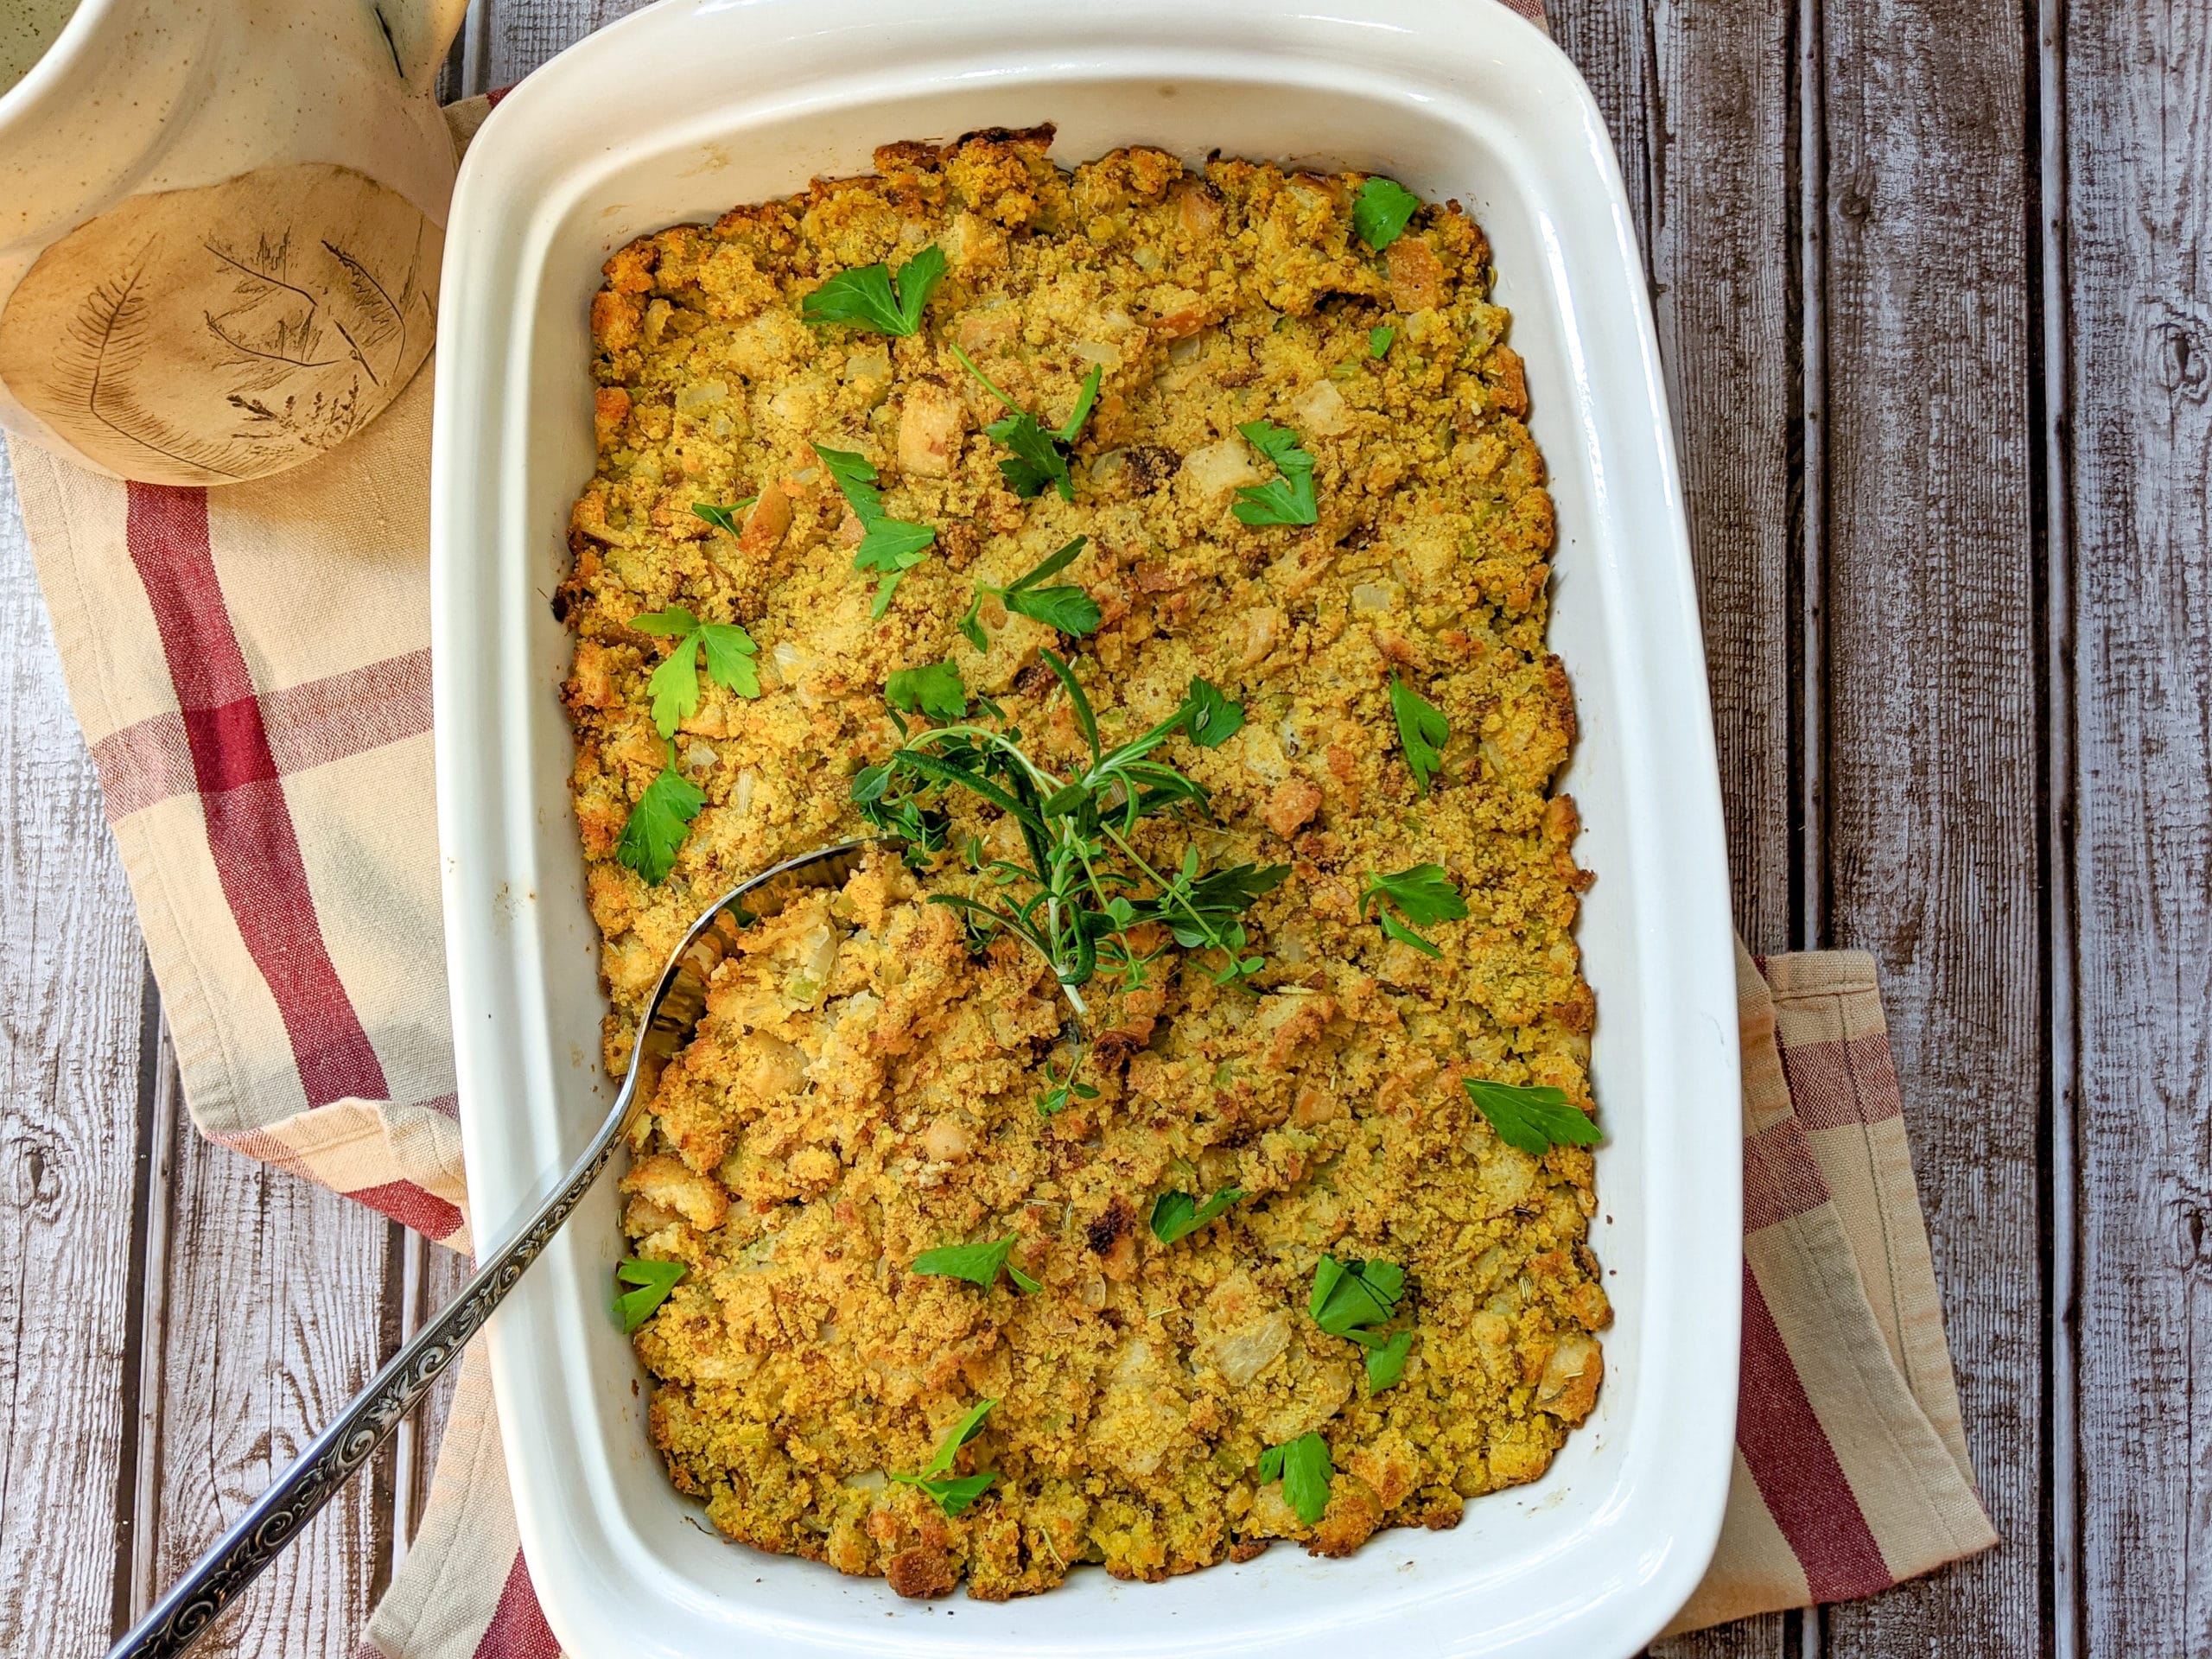 South Your Mouth: Mama's Special Cornbread Dressing